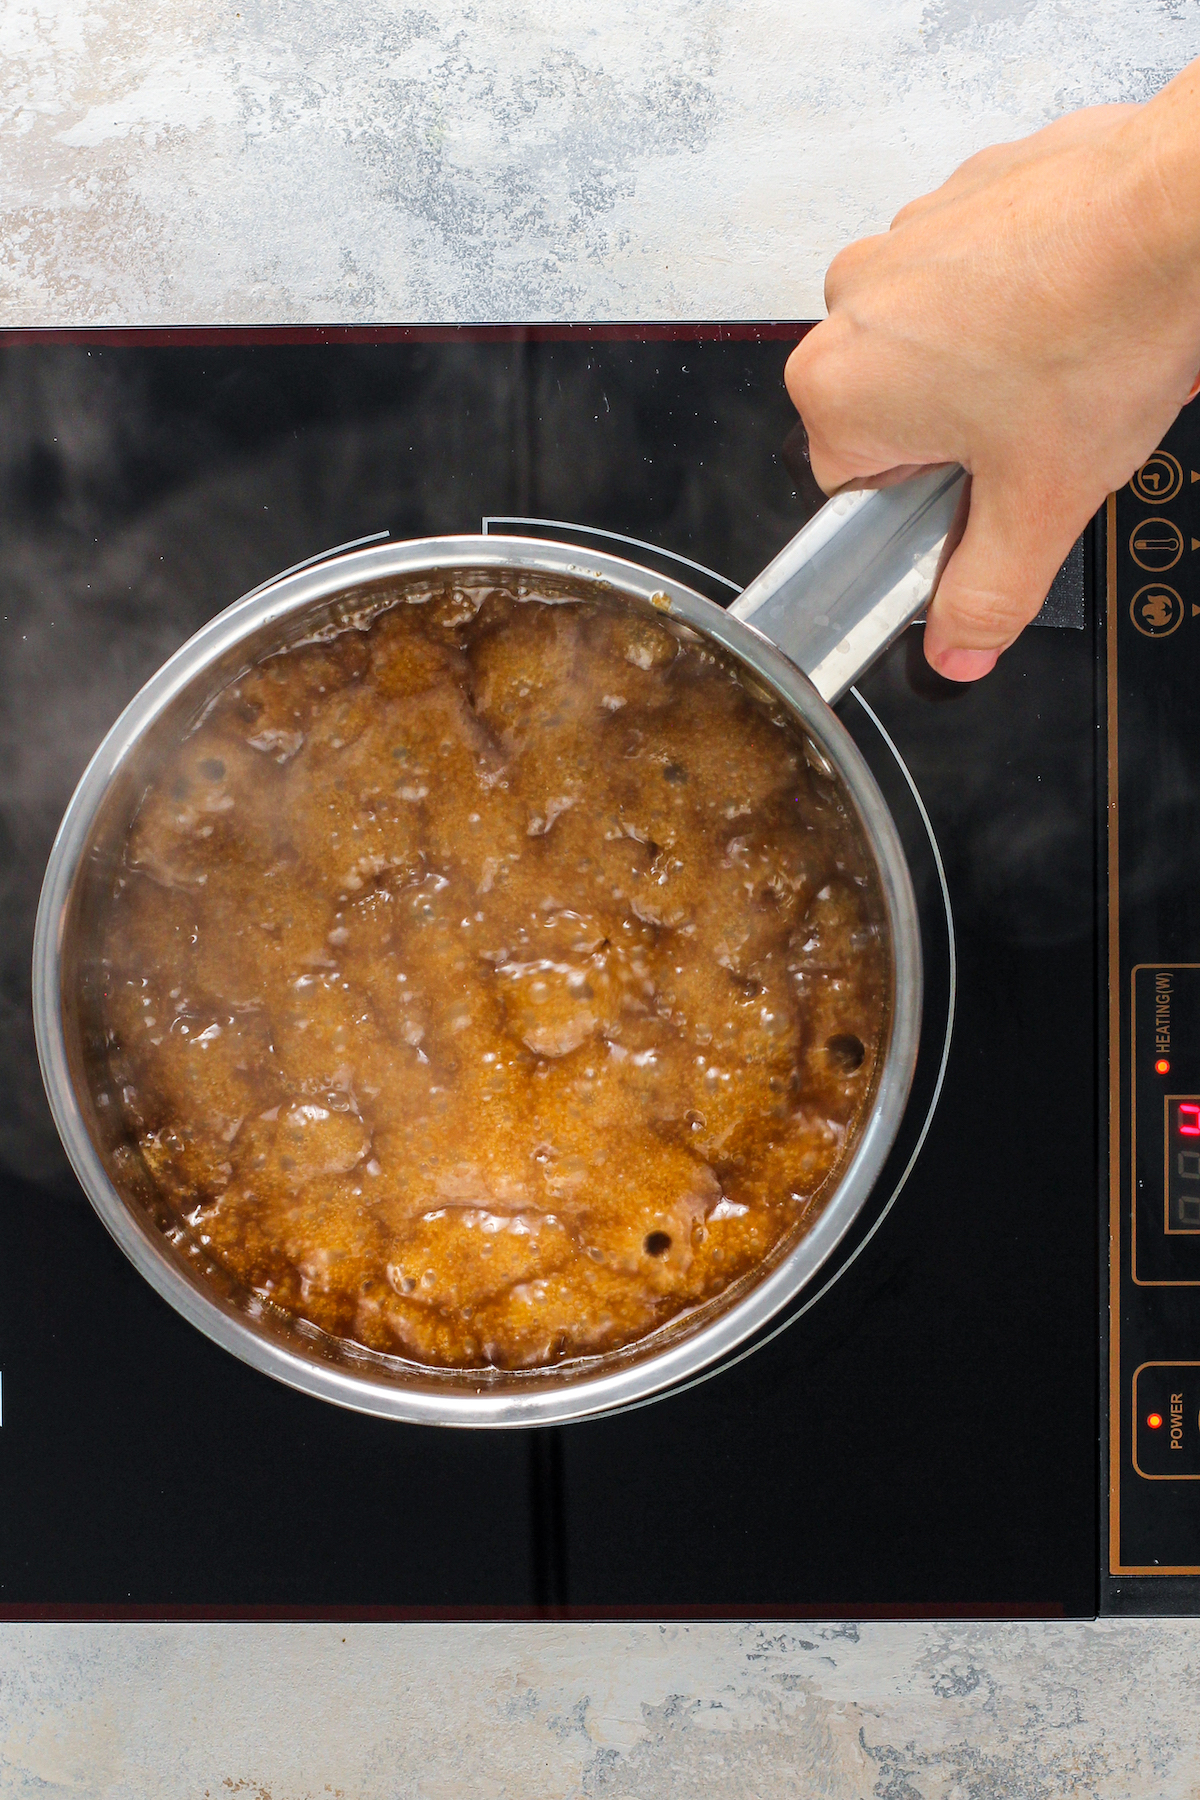 Toffee cooking in a pot on a stove top.